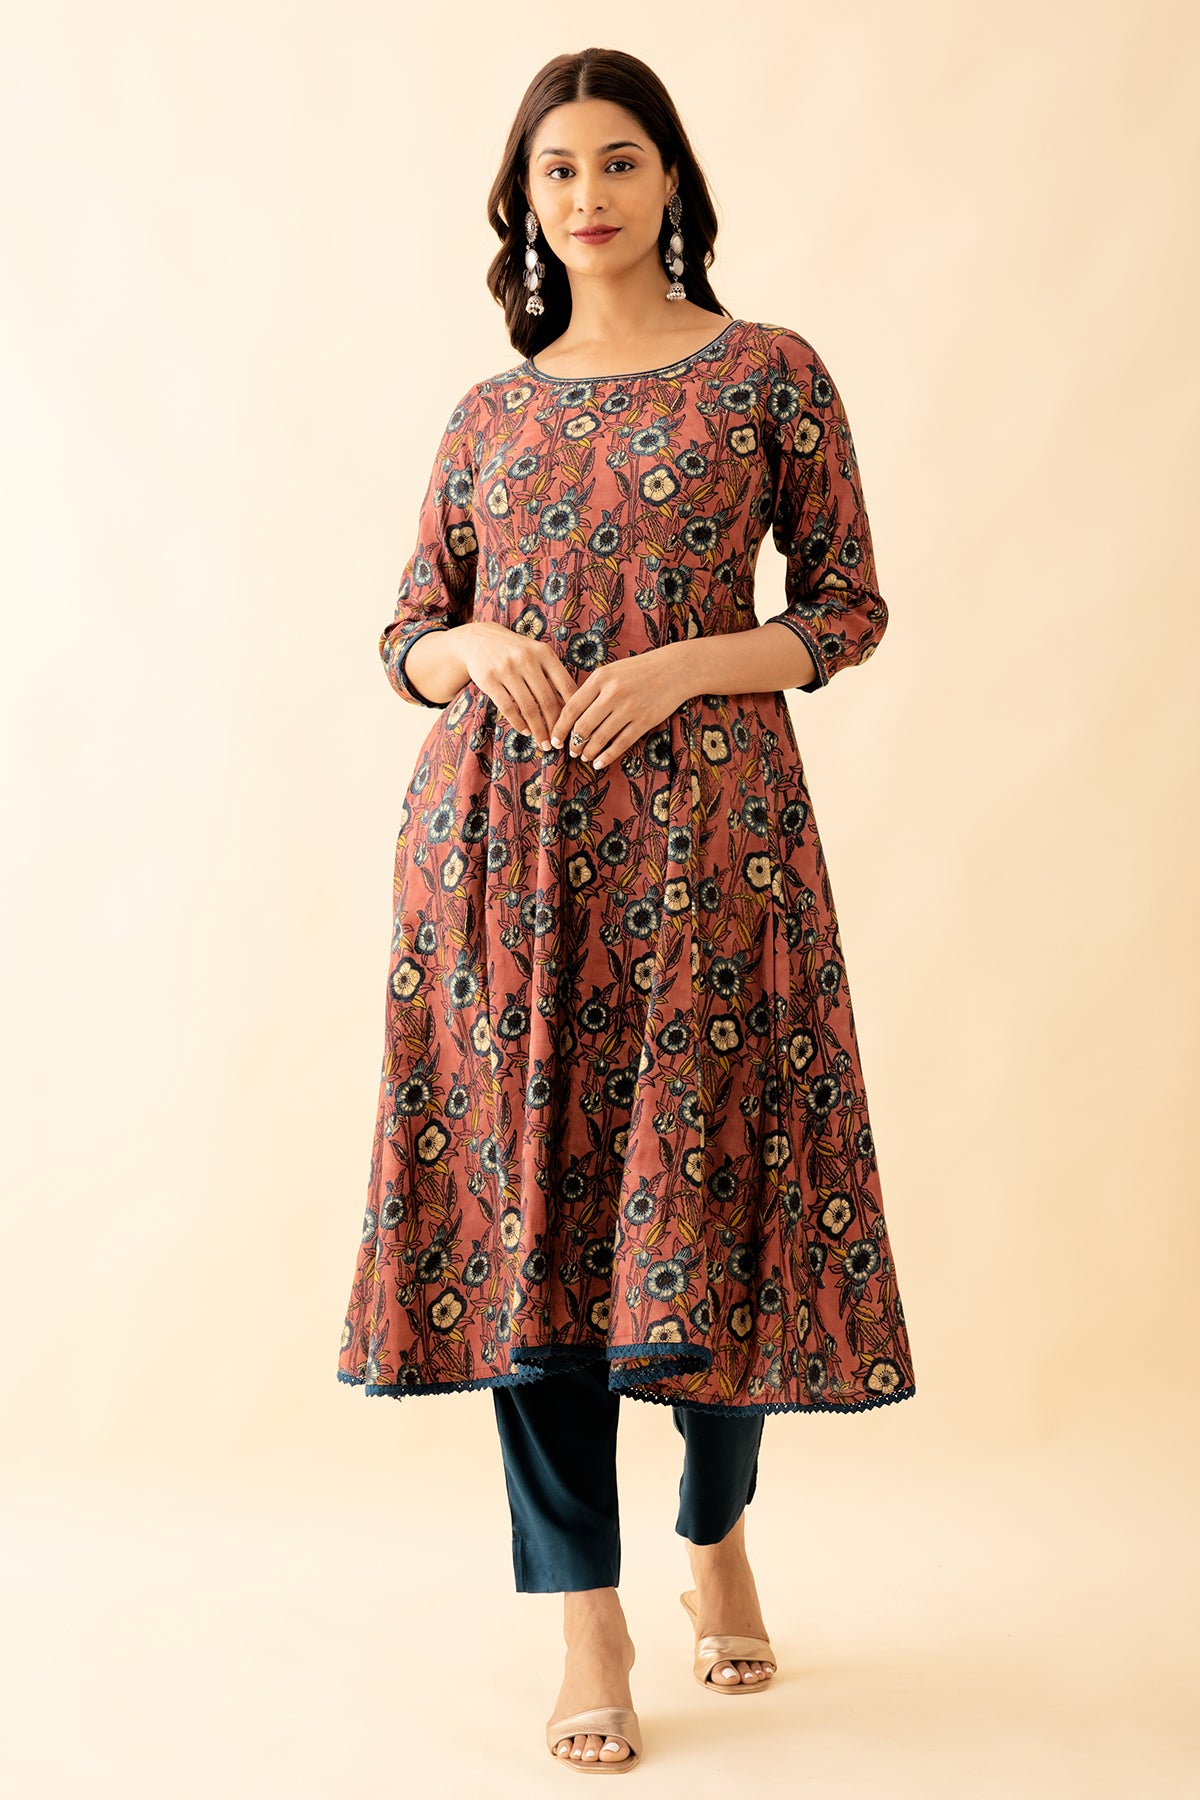 Jewel Embroidered Neckline With Allover Floral Embroidered Kurta Pant Set Maroon